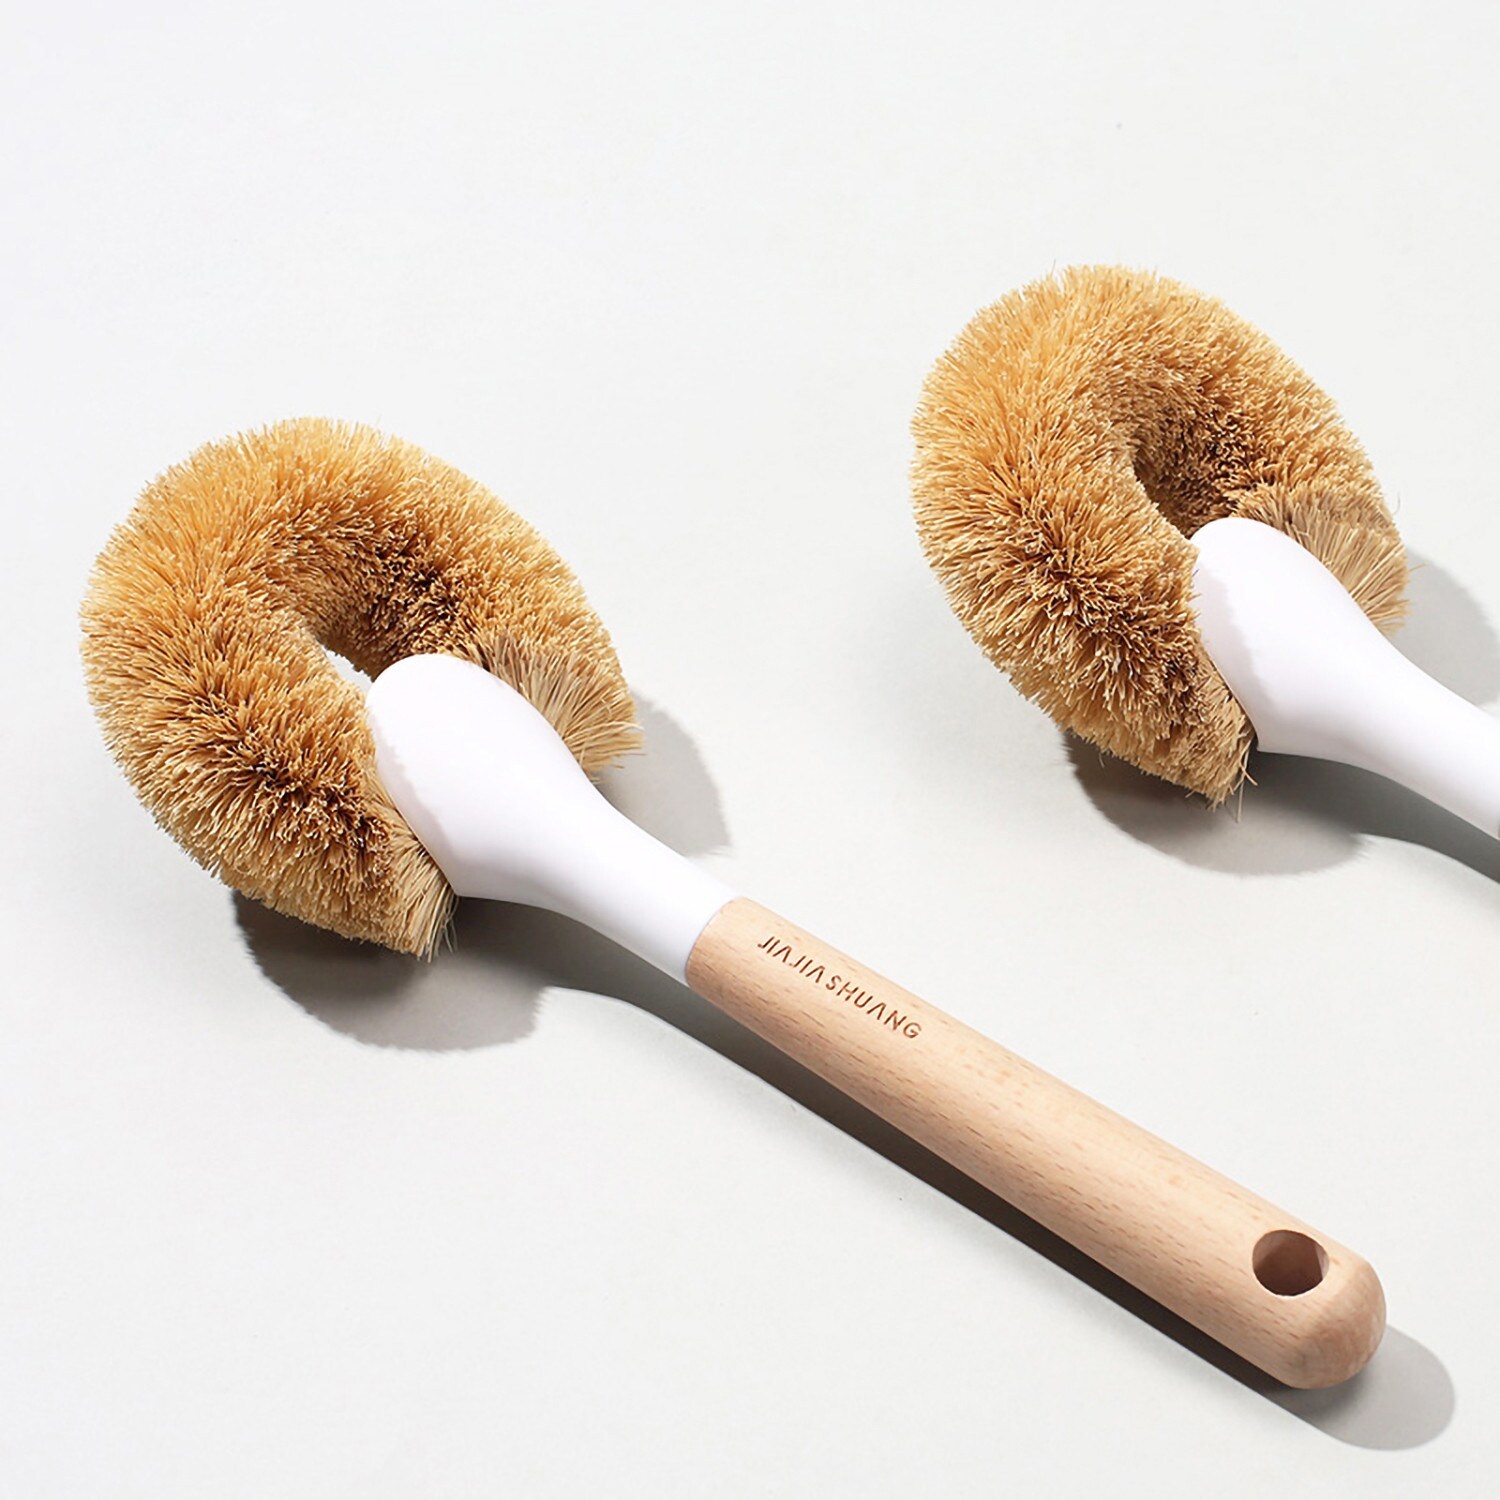 https://ak1.ostkcdn.com/images/products/is/images/direct/4e22dbcff7232af37720fe9250dc31933e6123e5/Kitchen-Dish-Brush-With-Beech-Handle-Pot-Brush-For-Pans-Pots-Sink-Cleaning.jpg